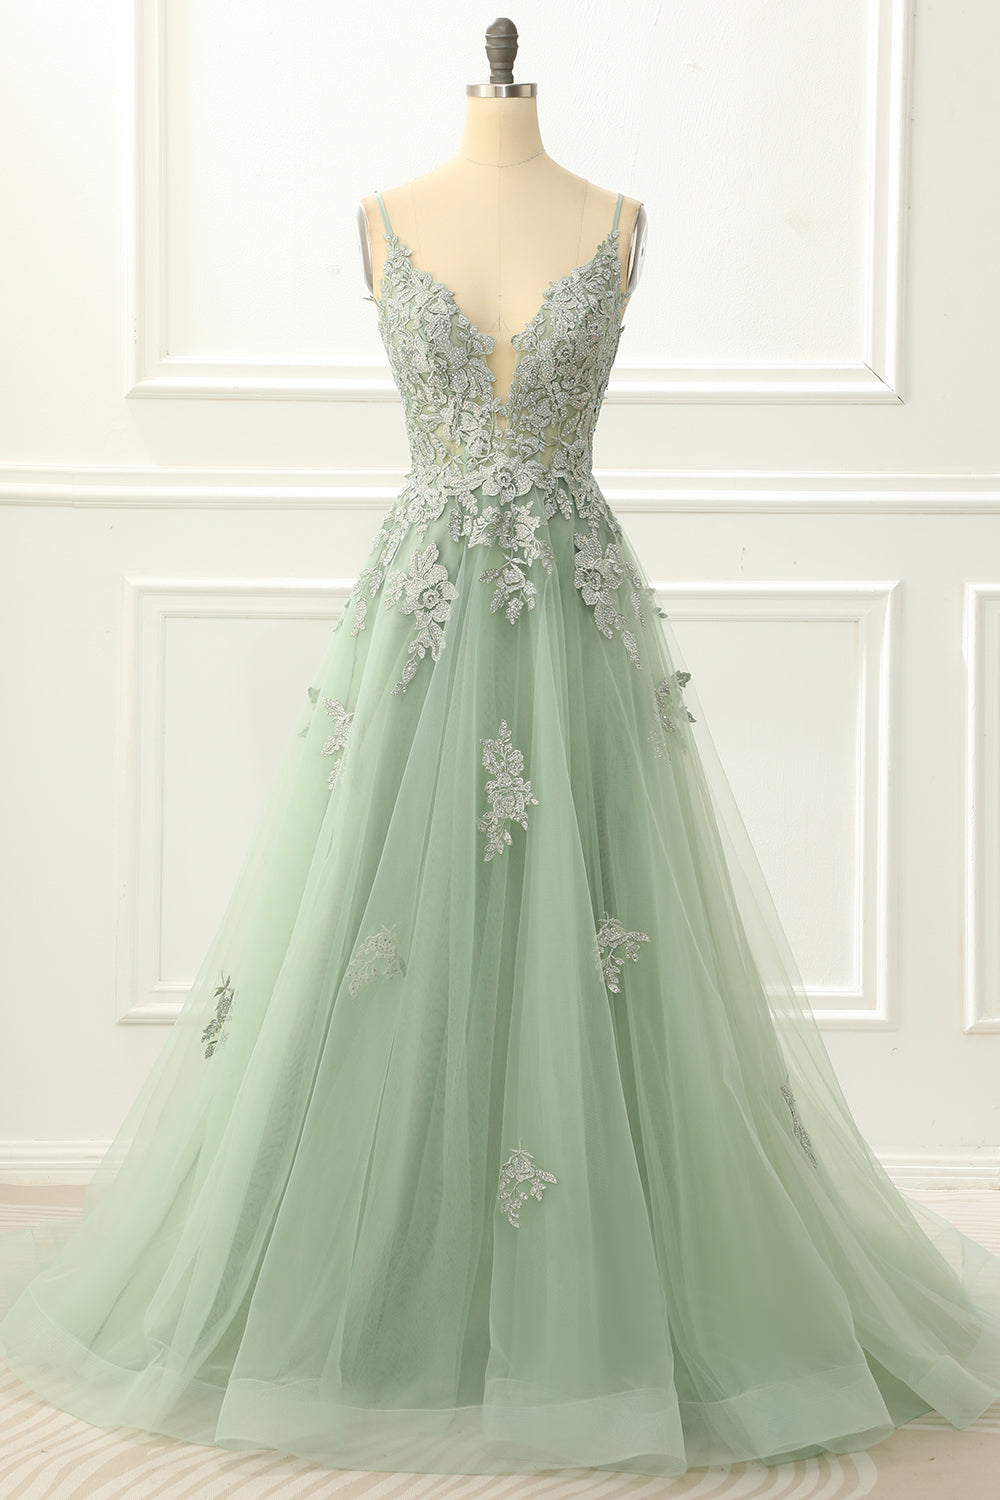 Prom Dresses Suits Ideas, Spaghetti Straps Tulle Green Prom Dress with Appliques